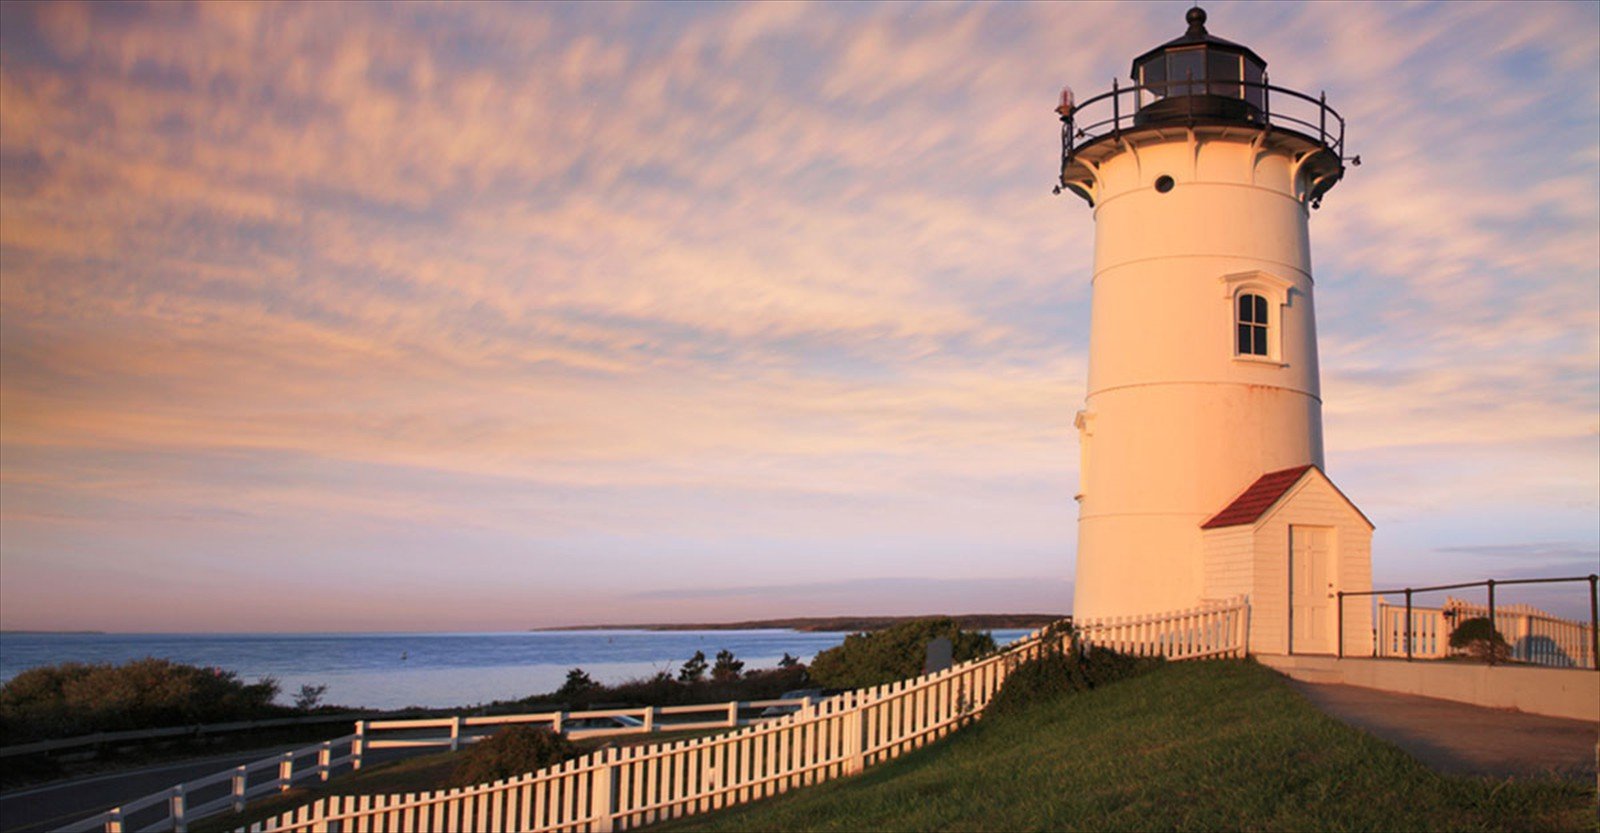 Things To Do In Falmouth Mass - Visit The Nobska Lighthouse 